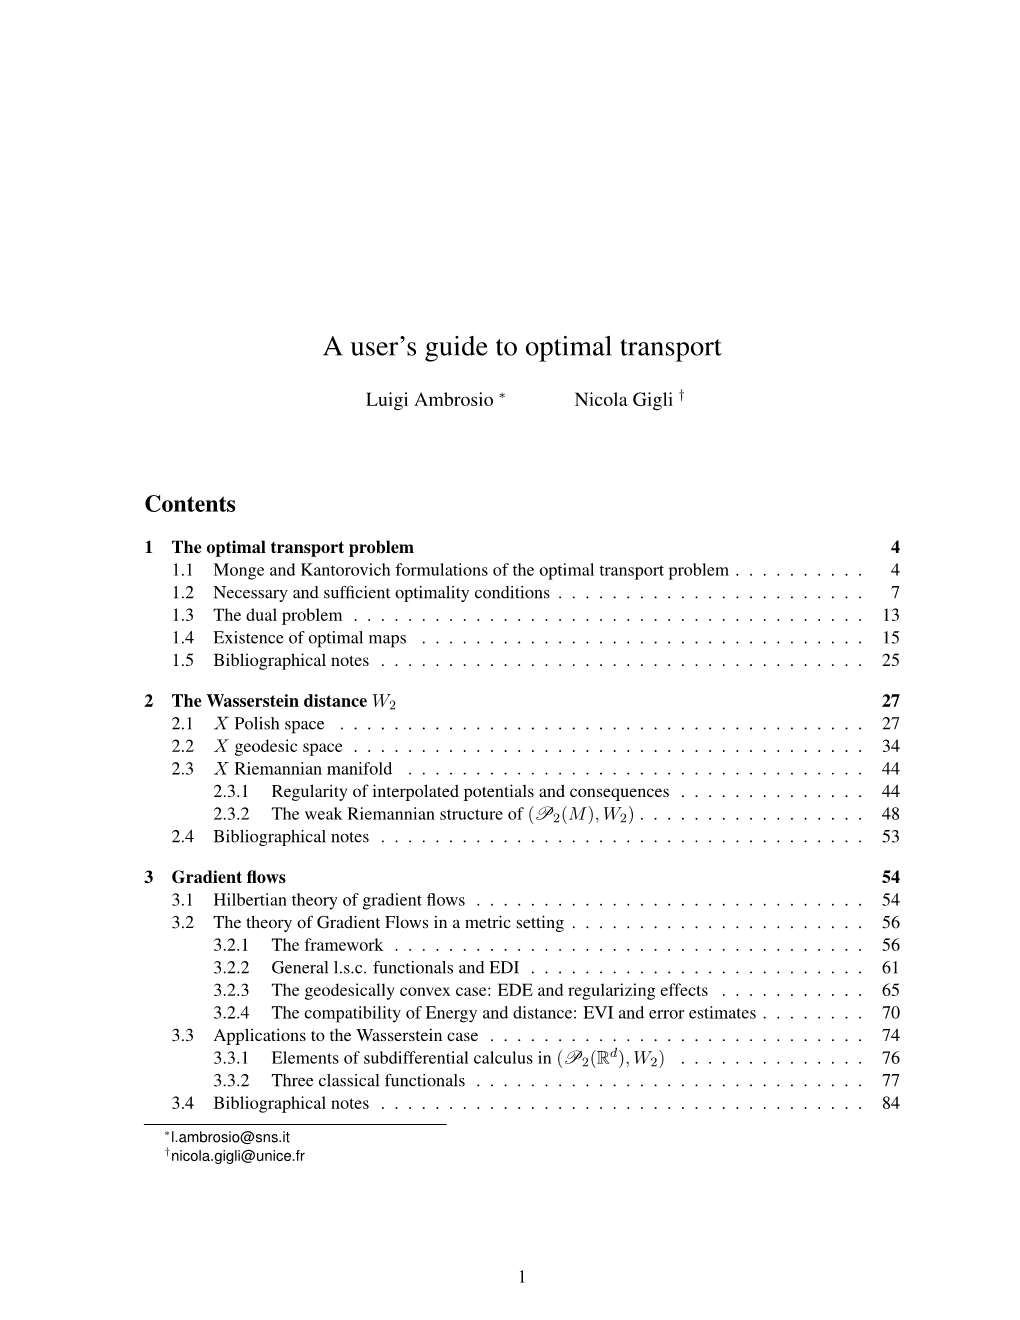 A User's Guide to Optimal Transport